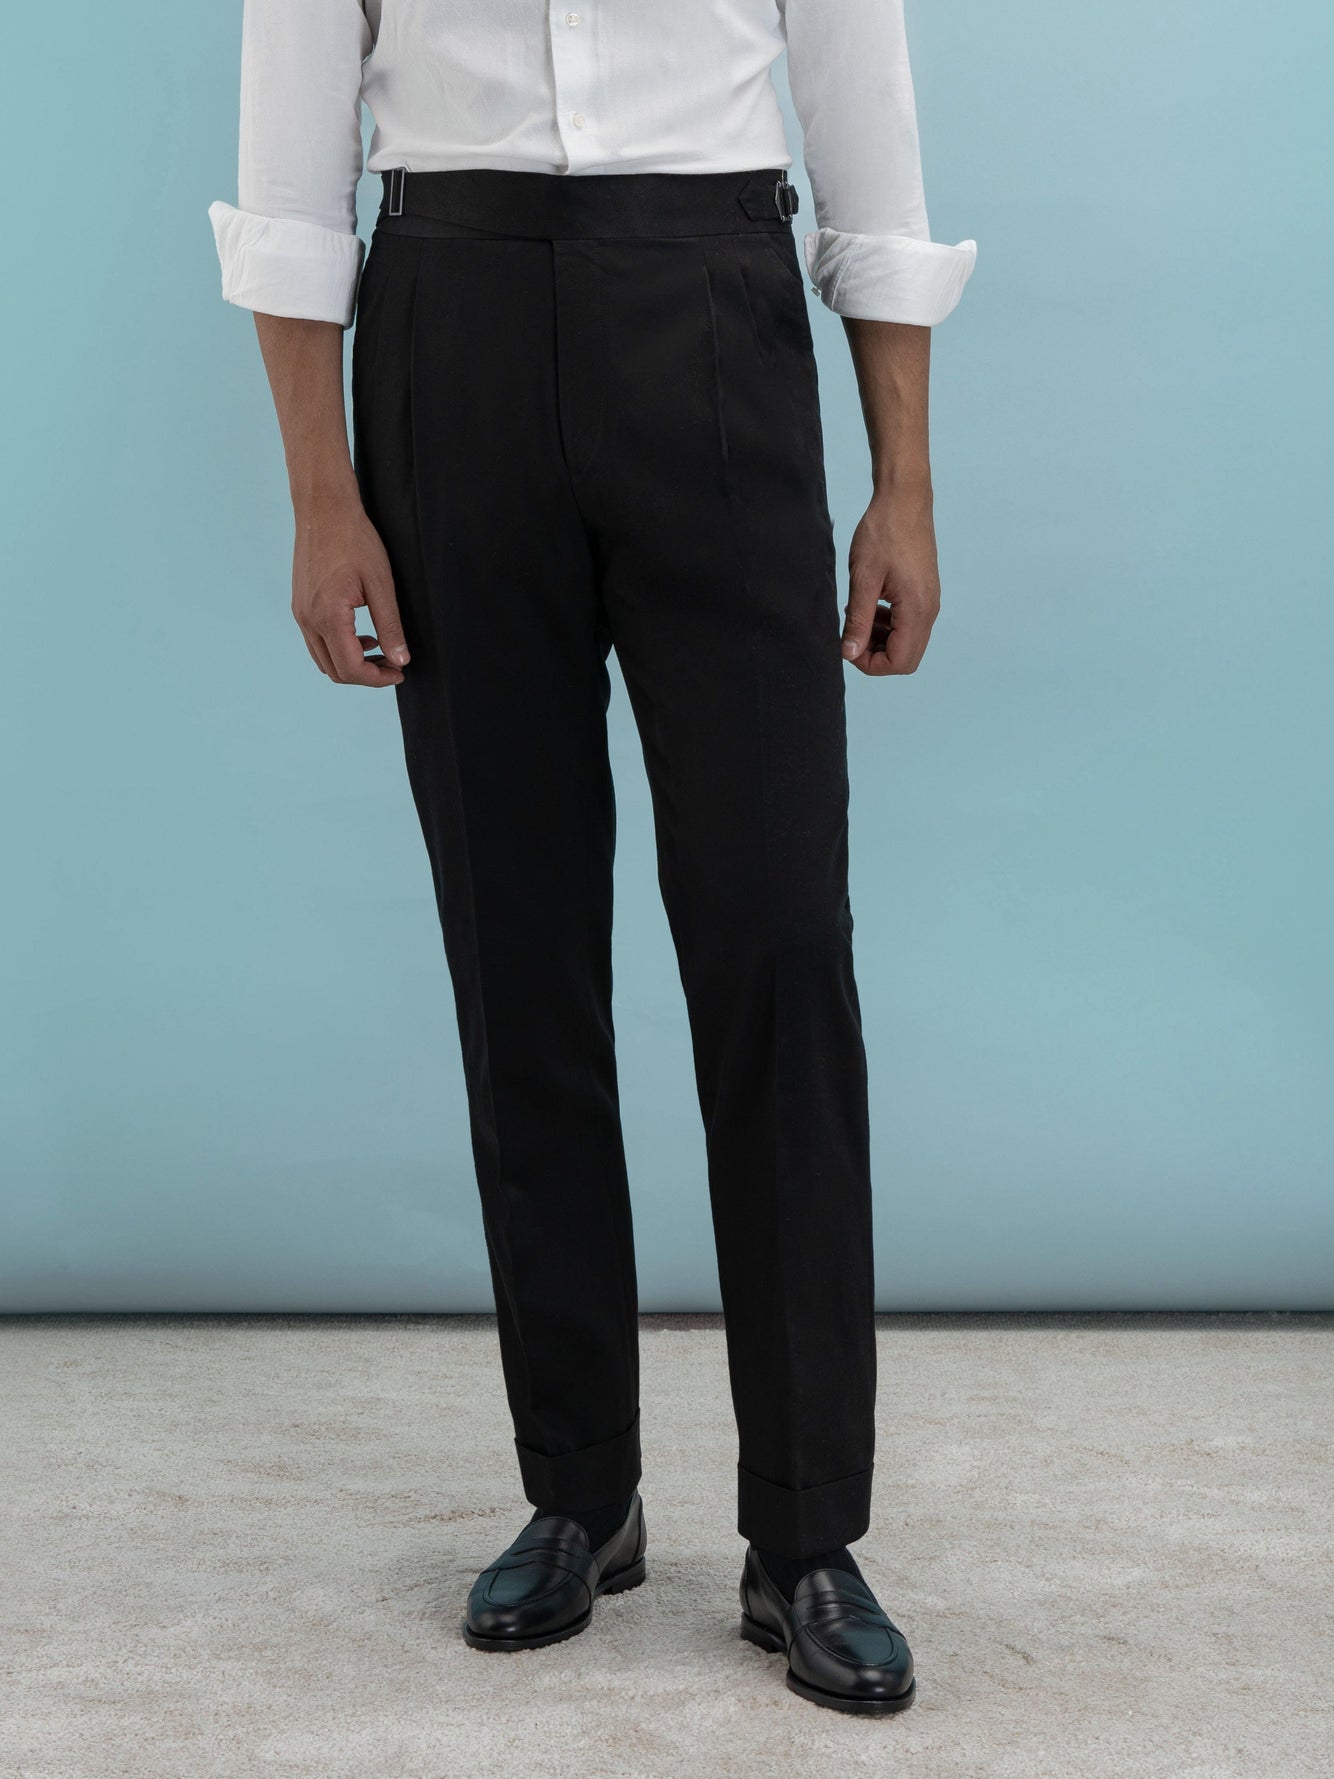 Grand Le Mar  White Cotton Gurkha Trousers Casual Comfort with a Stylish  Twist.